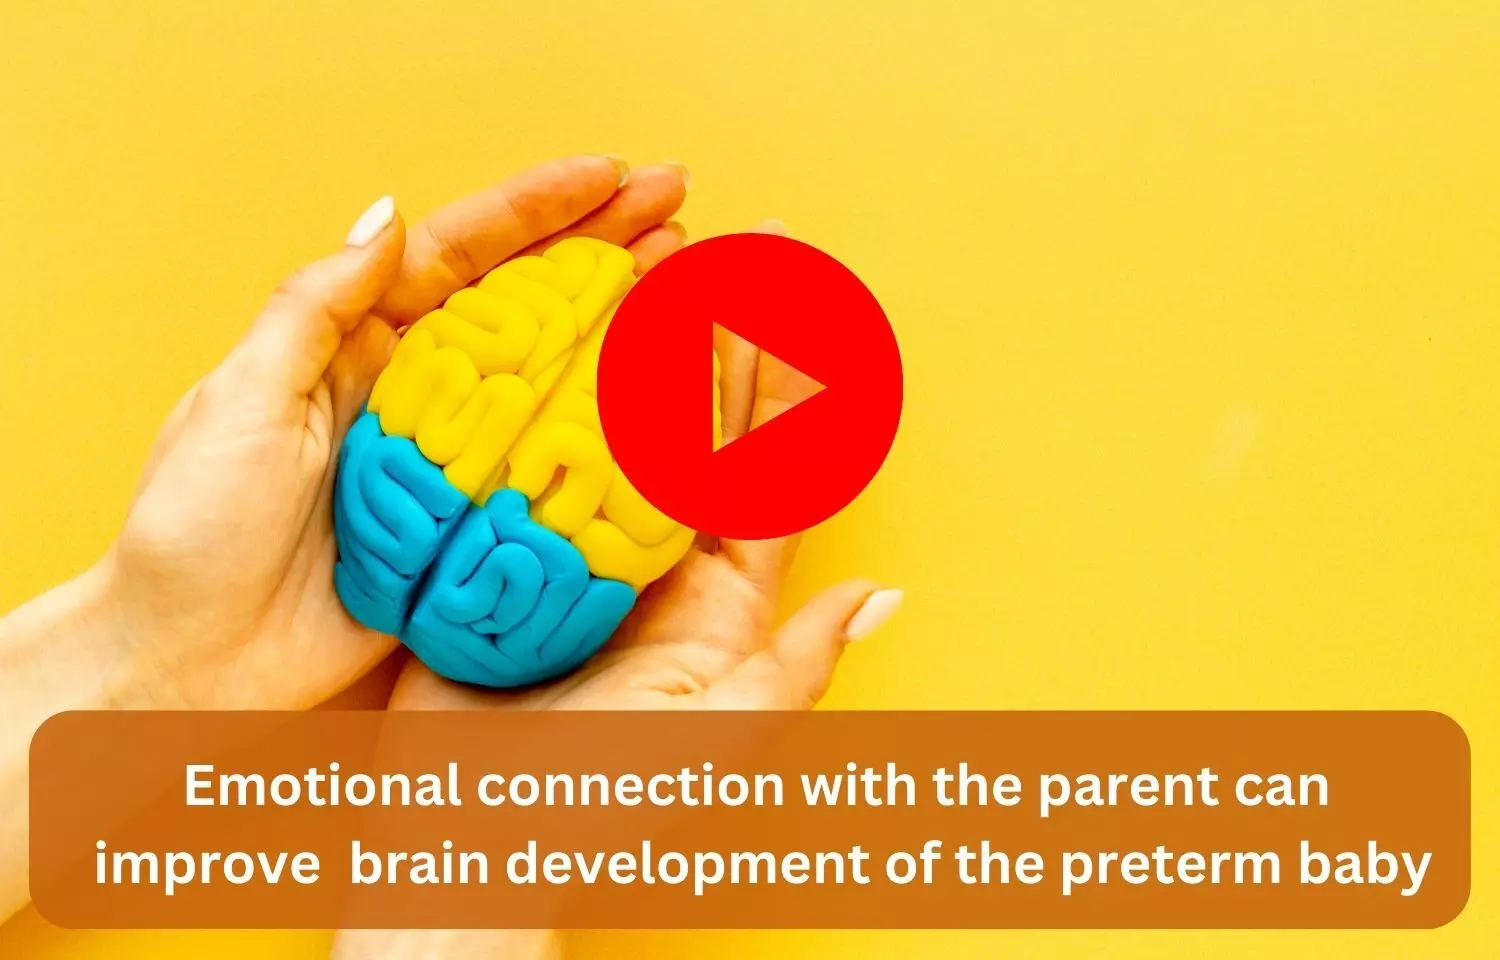 Emotional connection with the parent can improve brain development of the preterm baby